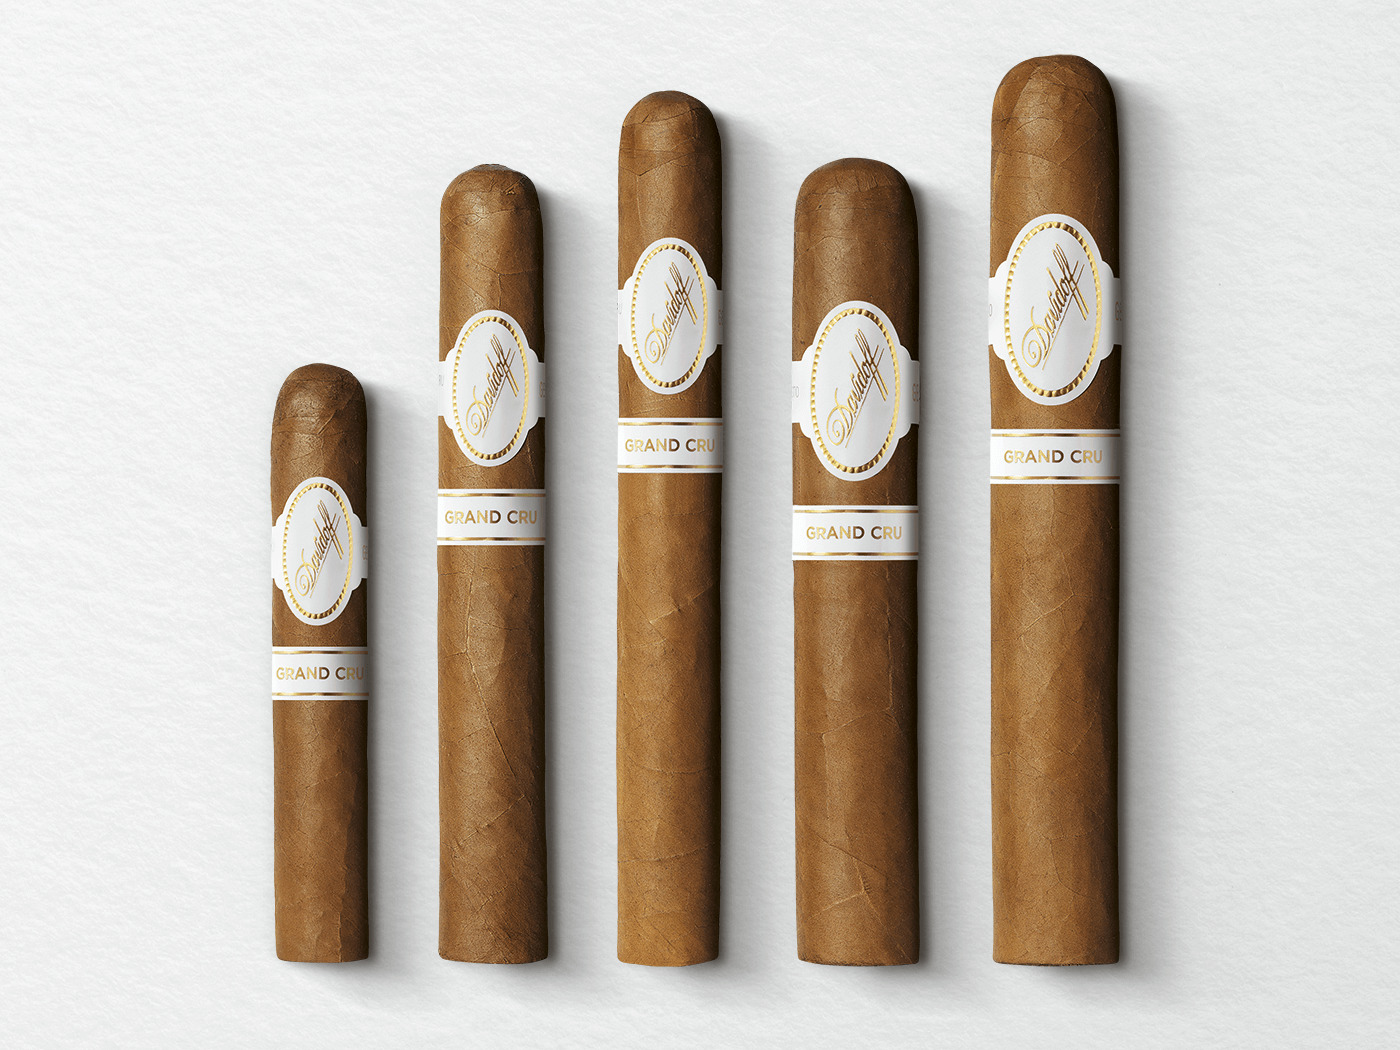 The 5 different formats of the Davidoff Grand Cru line shown next to one another.